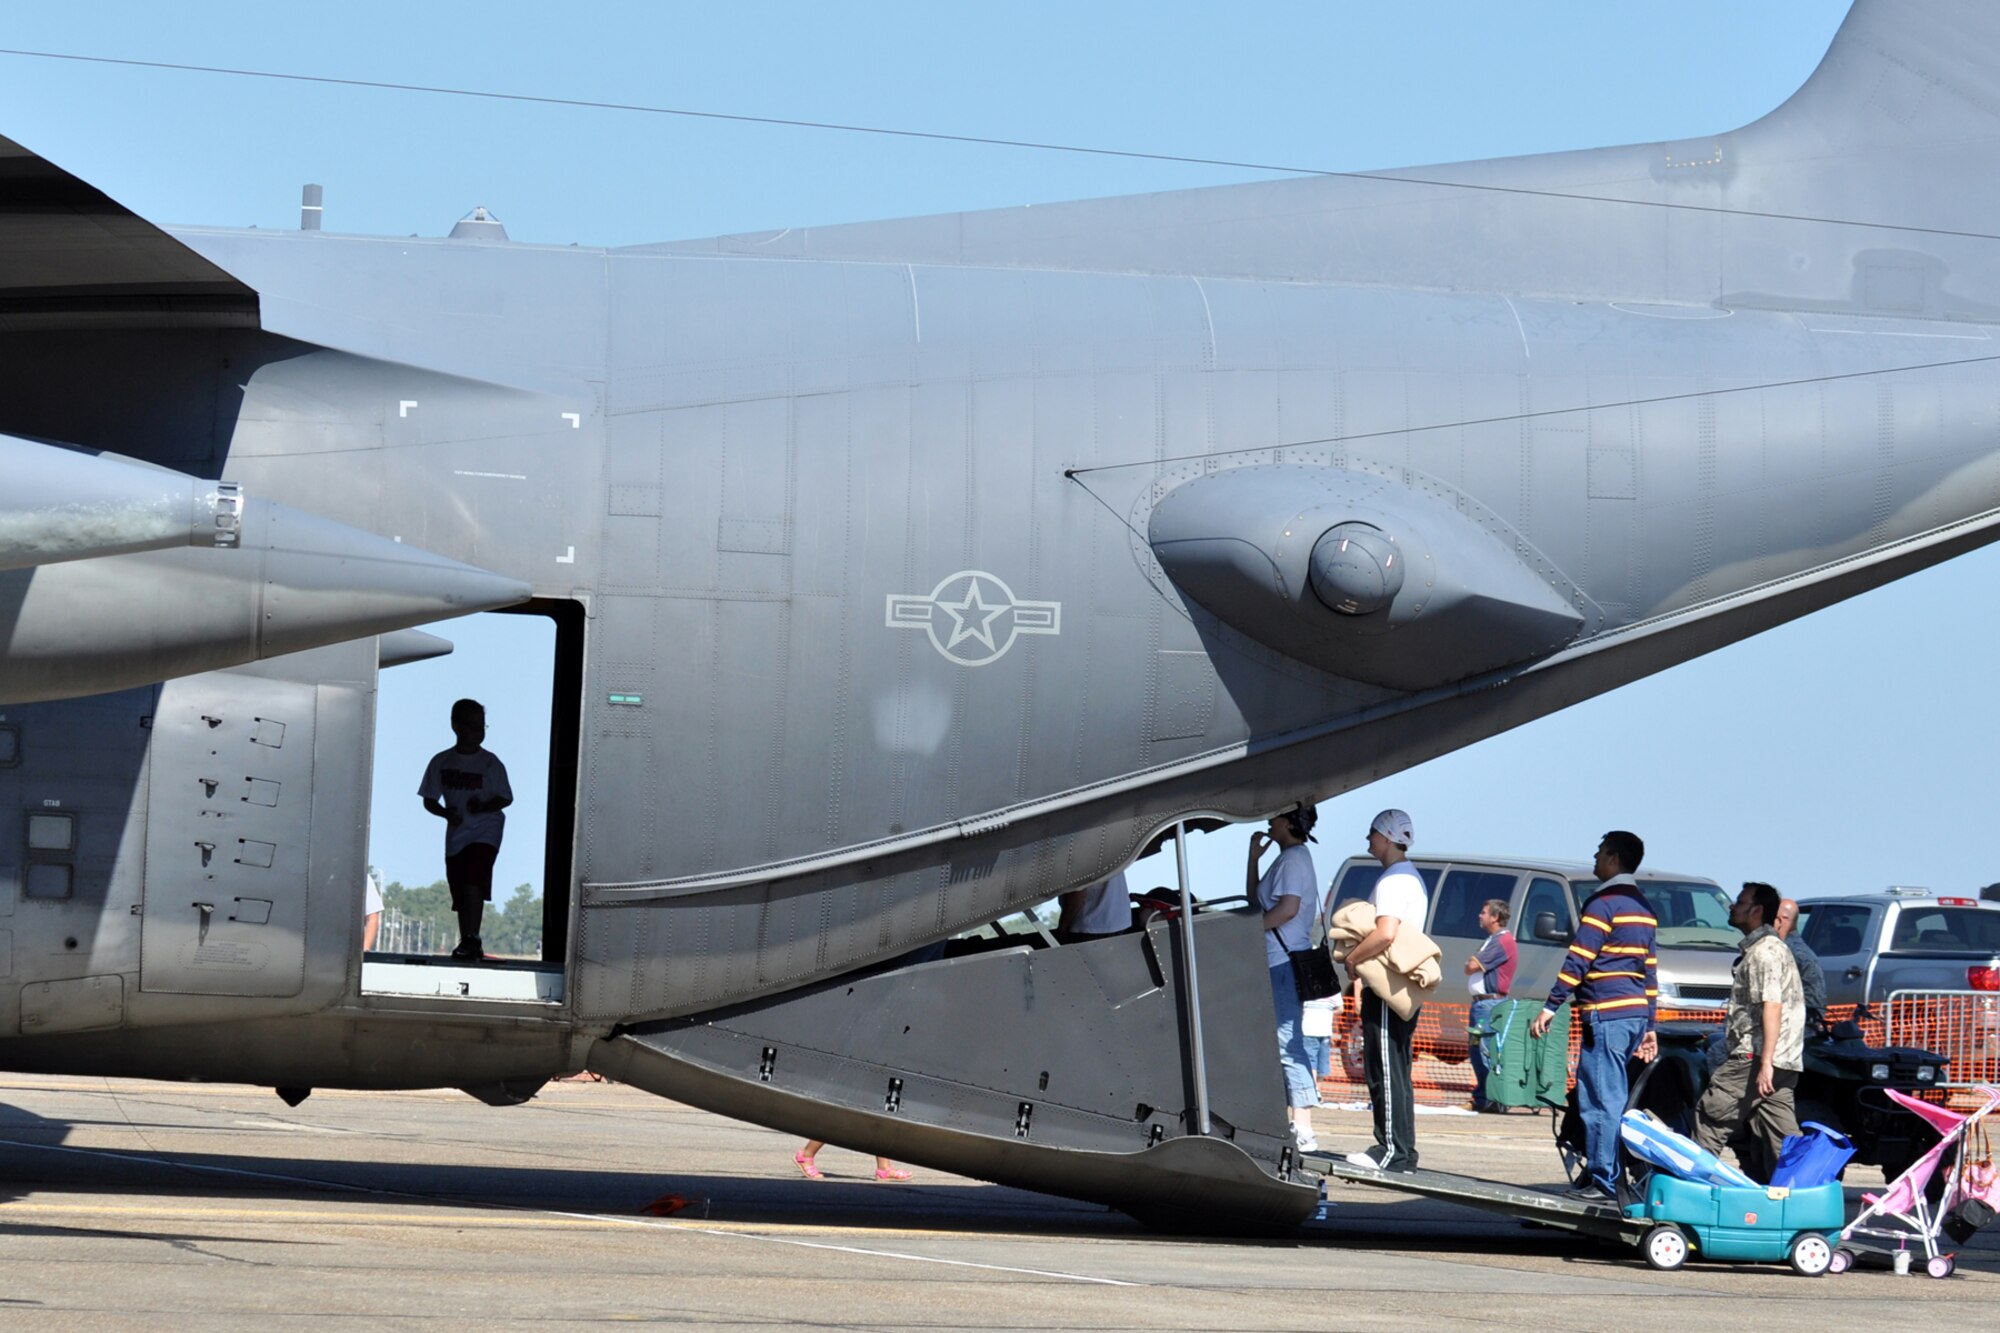 A young airshow patron stands in the door way of a 919th Special Operations Wing  C-130E Combat Talon while others wait to climb in for a tour of the aircraft April 11 at the Eglin Air Force Base 75th Anniversary Airshow.  More than 125,000 were in attendance during the air show April 10-11, enjoying a variety of aerial performances and static displays. This was Eglin’s first open house since 2007 and was timed to coincide with the 75th anniversary of the installation. The Thunderbirds, F-22A Raptor demo and “Tora, Tora, Tora” were some of the highlights of the event.  (U.S. Air Force photo/Airman 1st Class Anthony Jennings.)